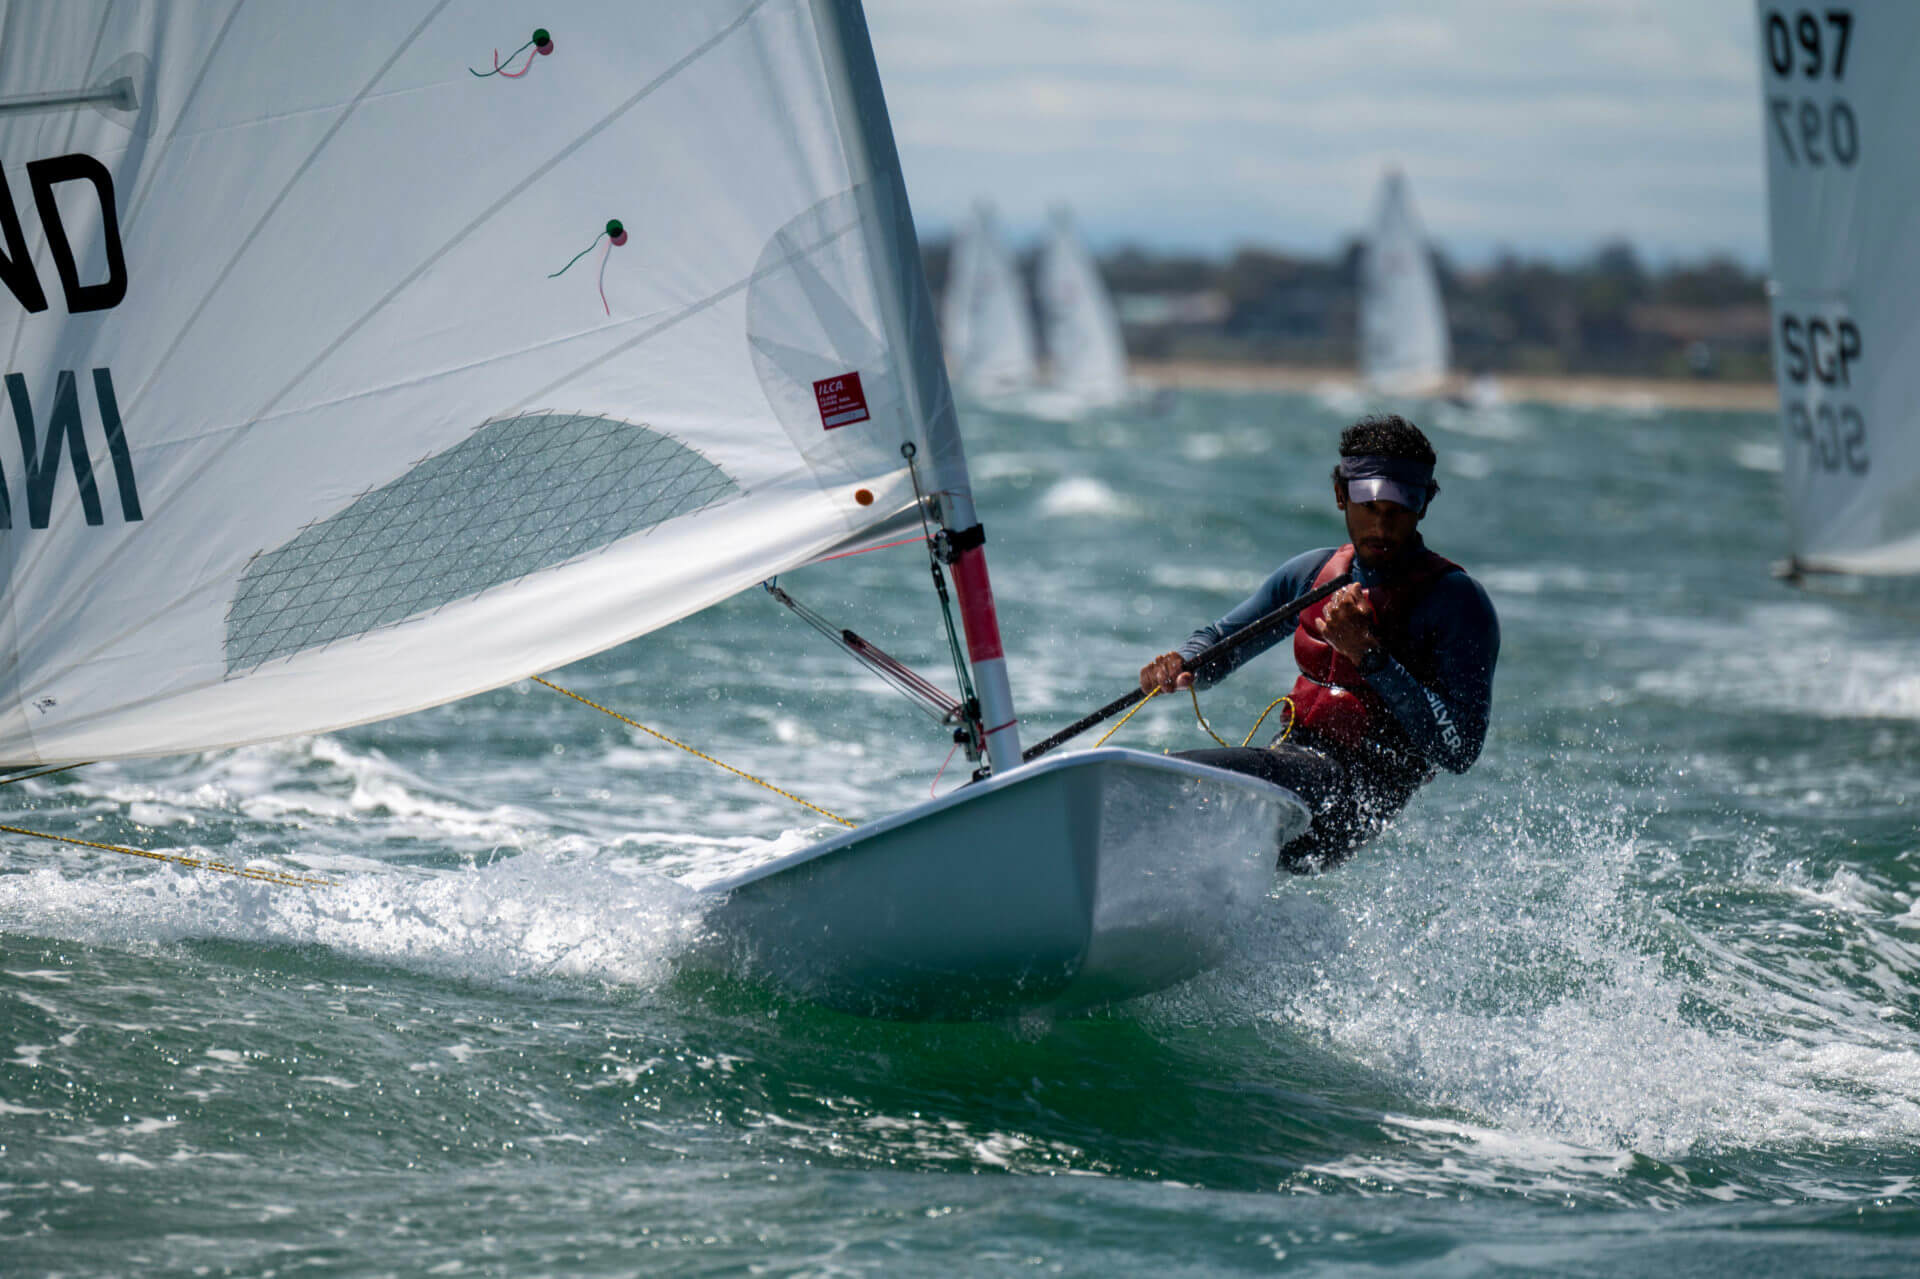 USC Viterbi mechanical engineering student Upamanyu Dutta in a sailboat tugging and leaning toward the right to accelerate over the other sailboats in the race, pictured in the background. 